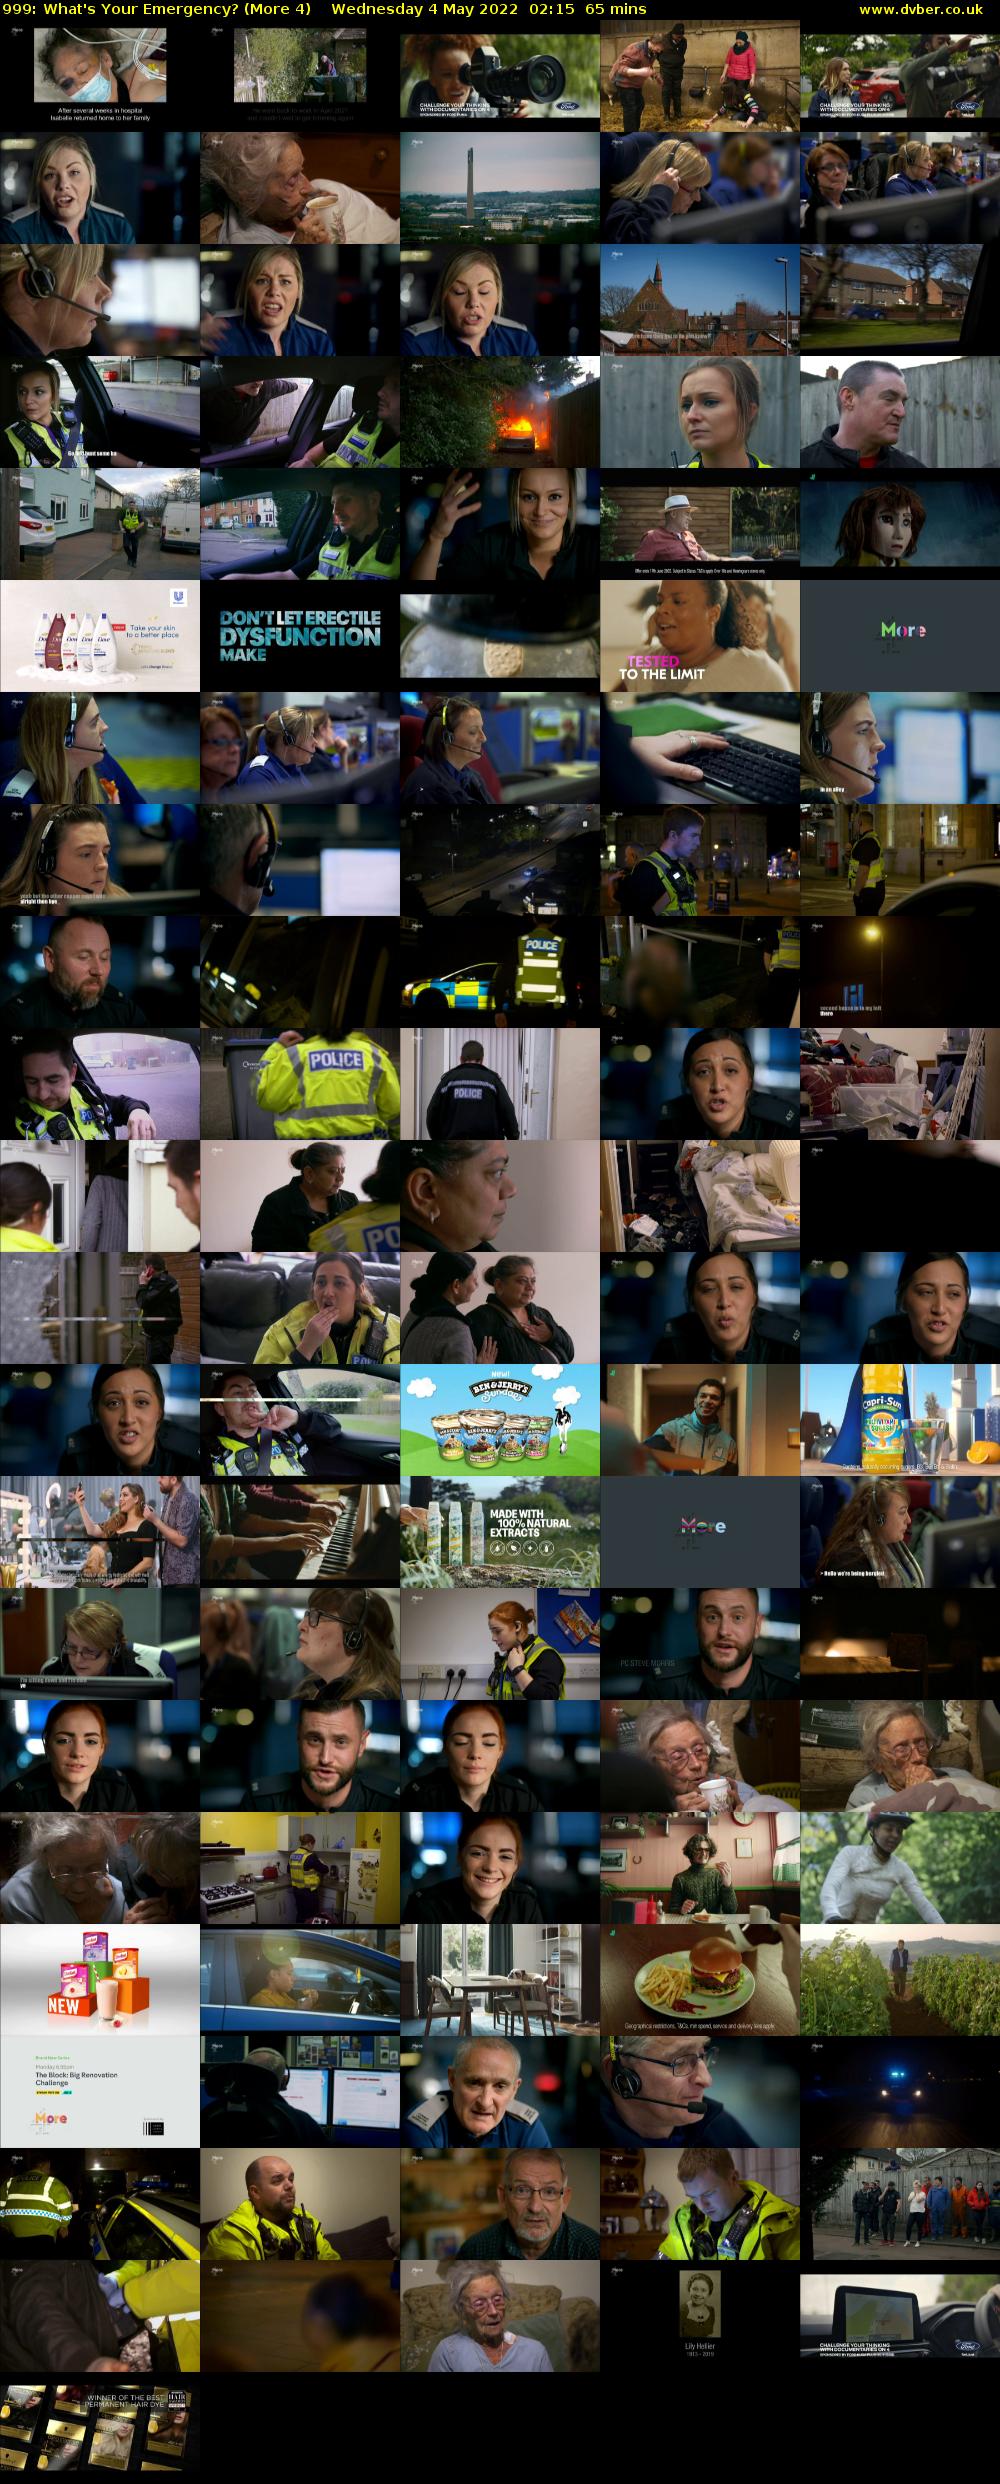 999: What's Your Emergency? (More 4) Wednesday 4 May 2022 02:15 - 03:20